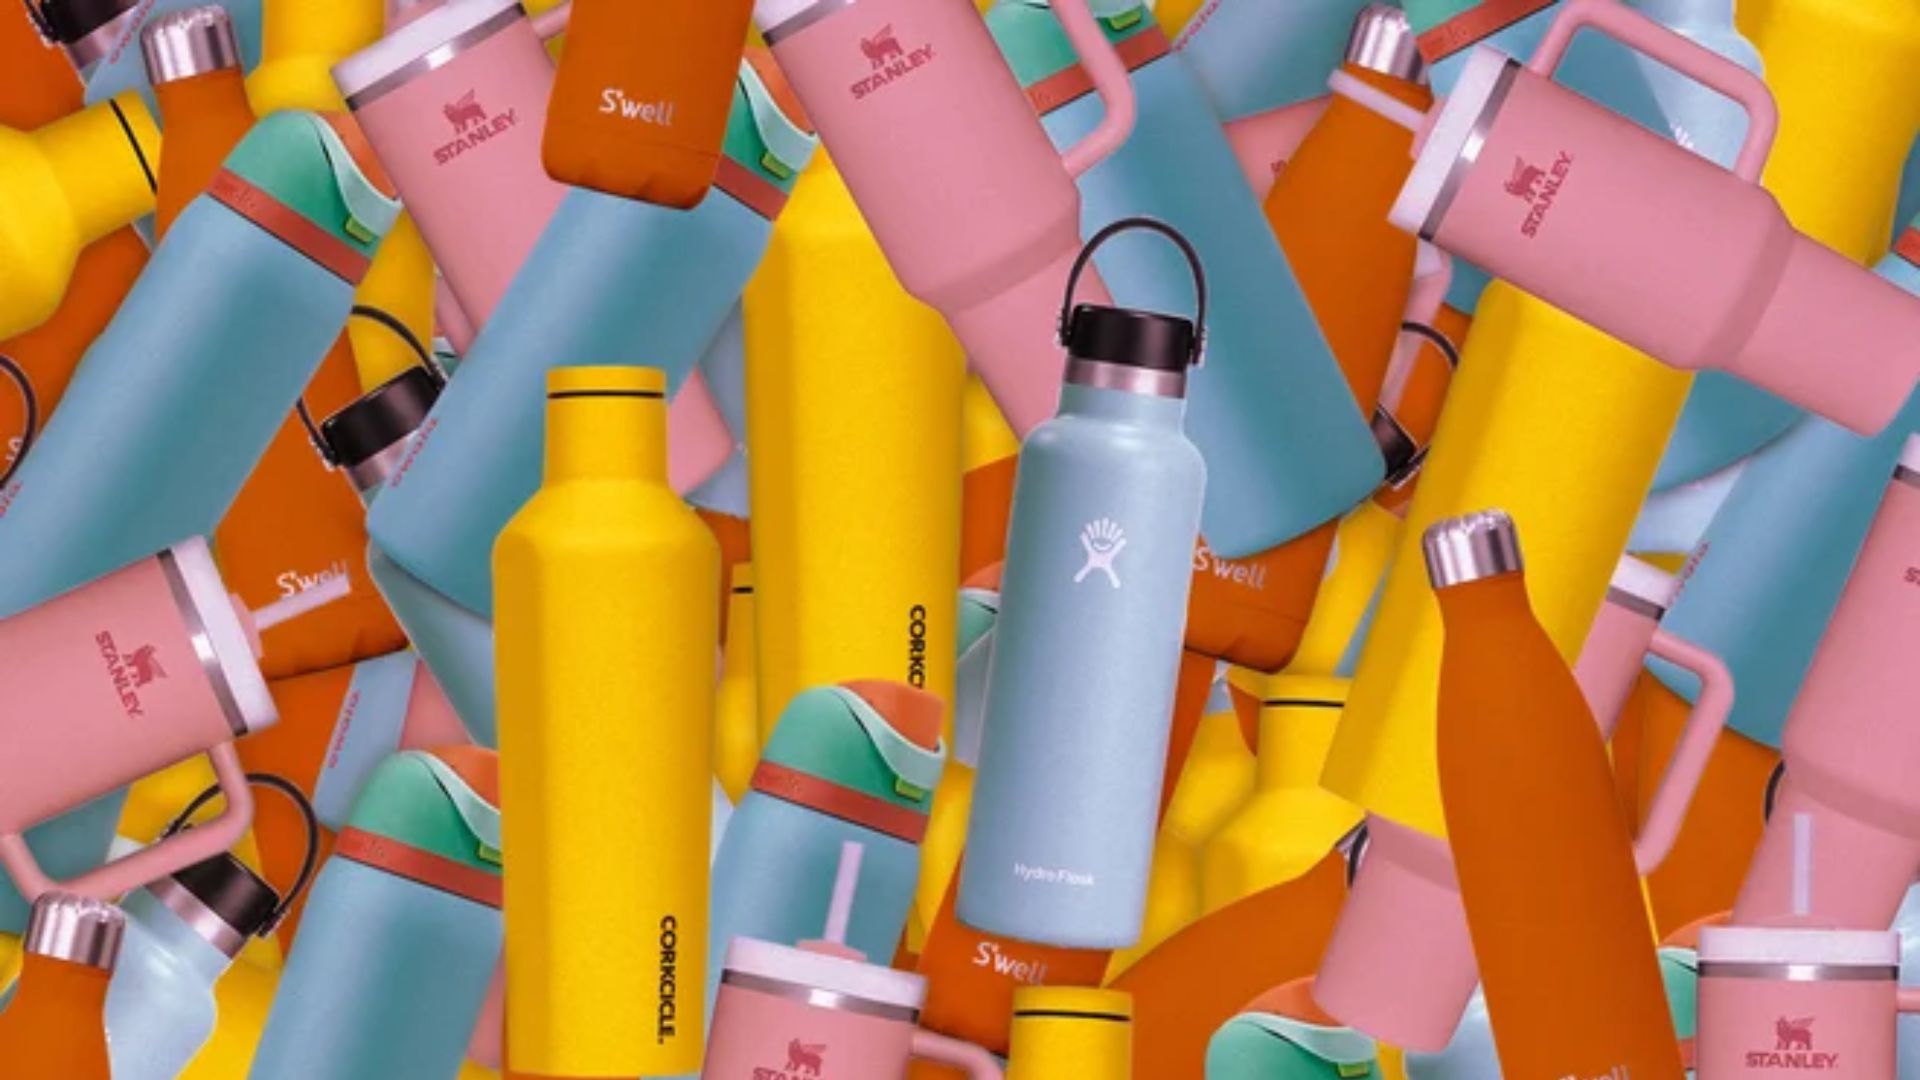 How Stanley, Owala and rivals are battling for water bottle market share—and what challenges remain